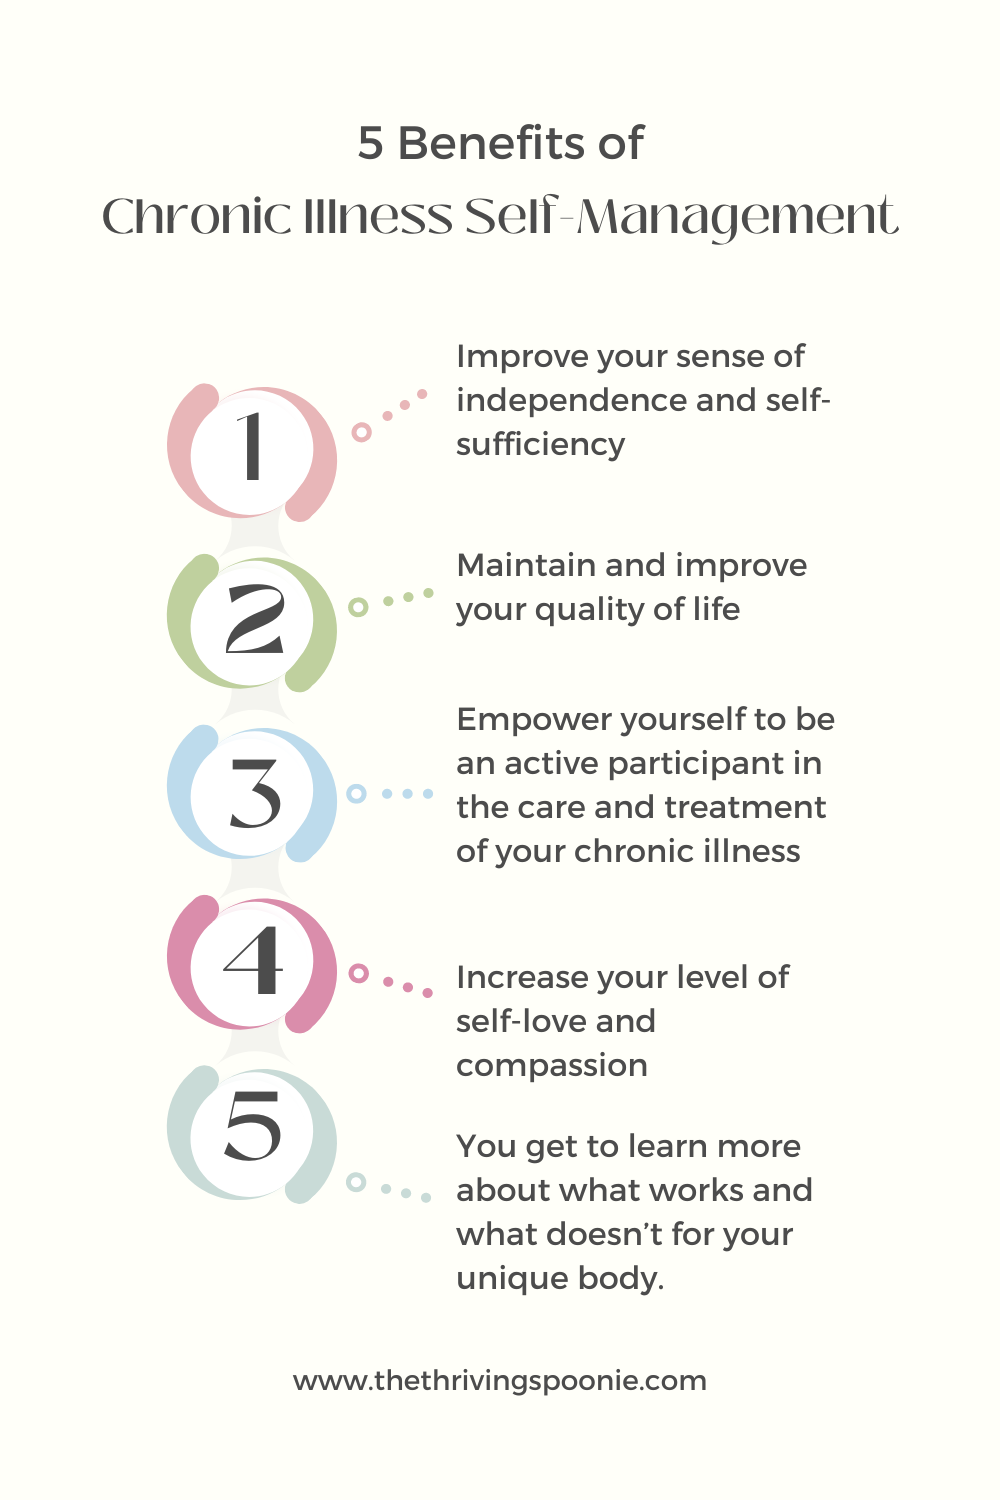 I consider chronic illness self-management a way to be an active participant in treating chronic illness, allowing us another way to avoid feeling like our illness is happening “to” us. Instead, by empowering ousrselves with self-management, we take a proactive approach to maintaining our overall wellness. Check out this blog post from The Thriving Spoonie to learn more!